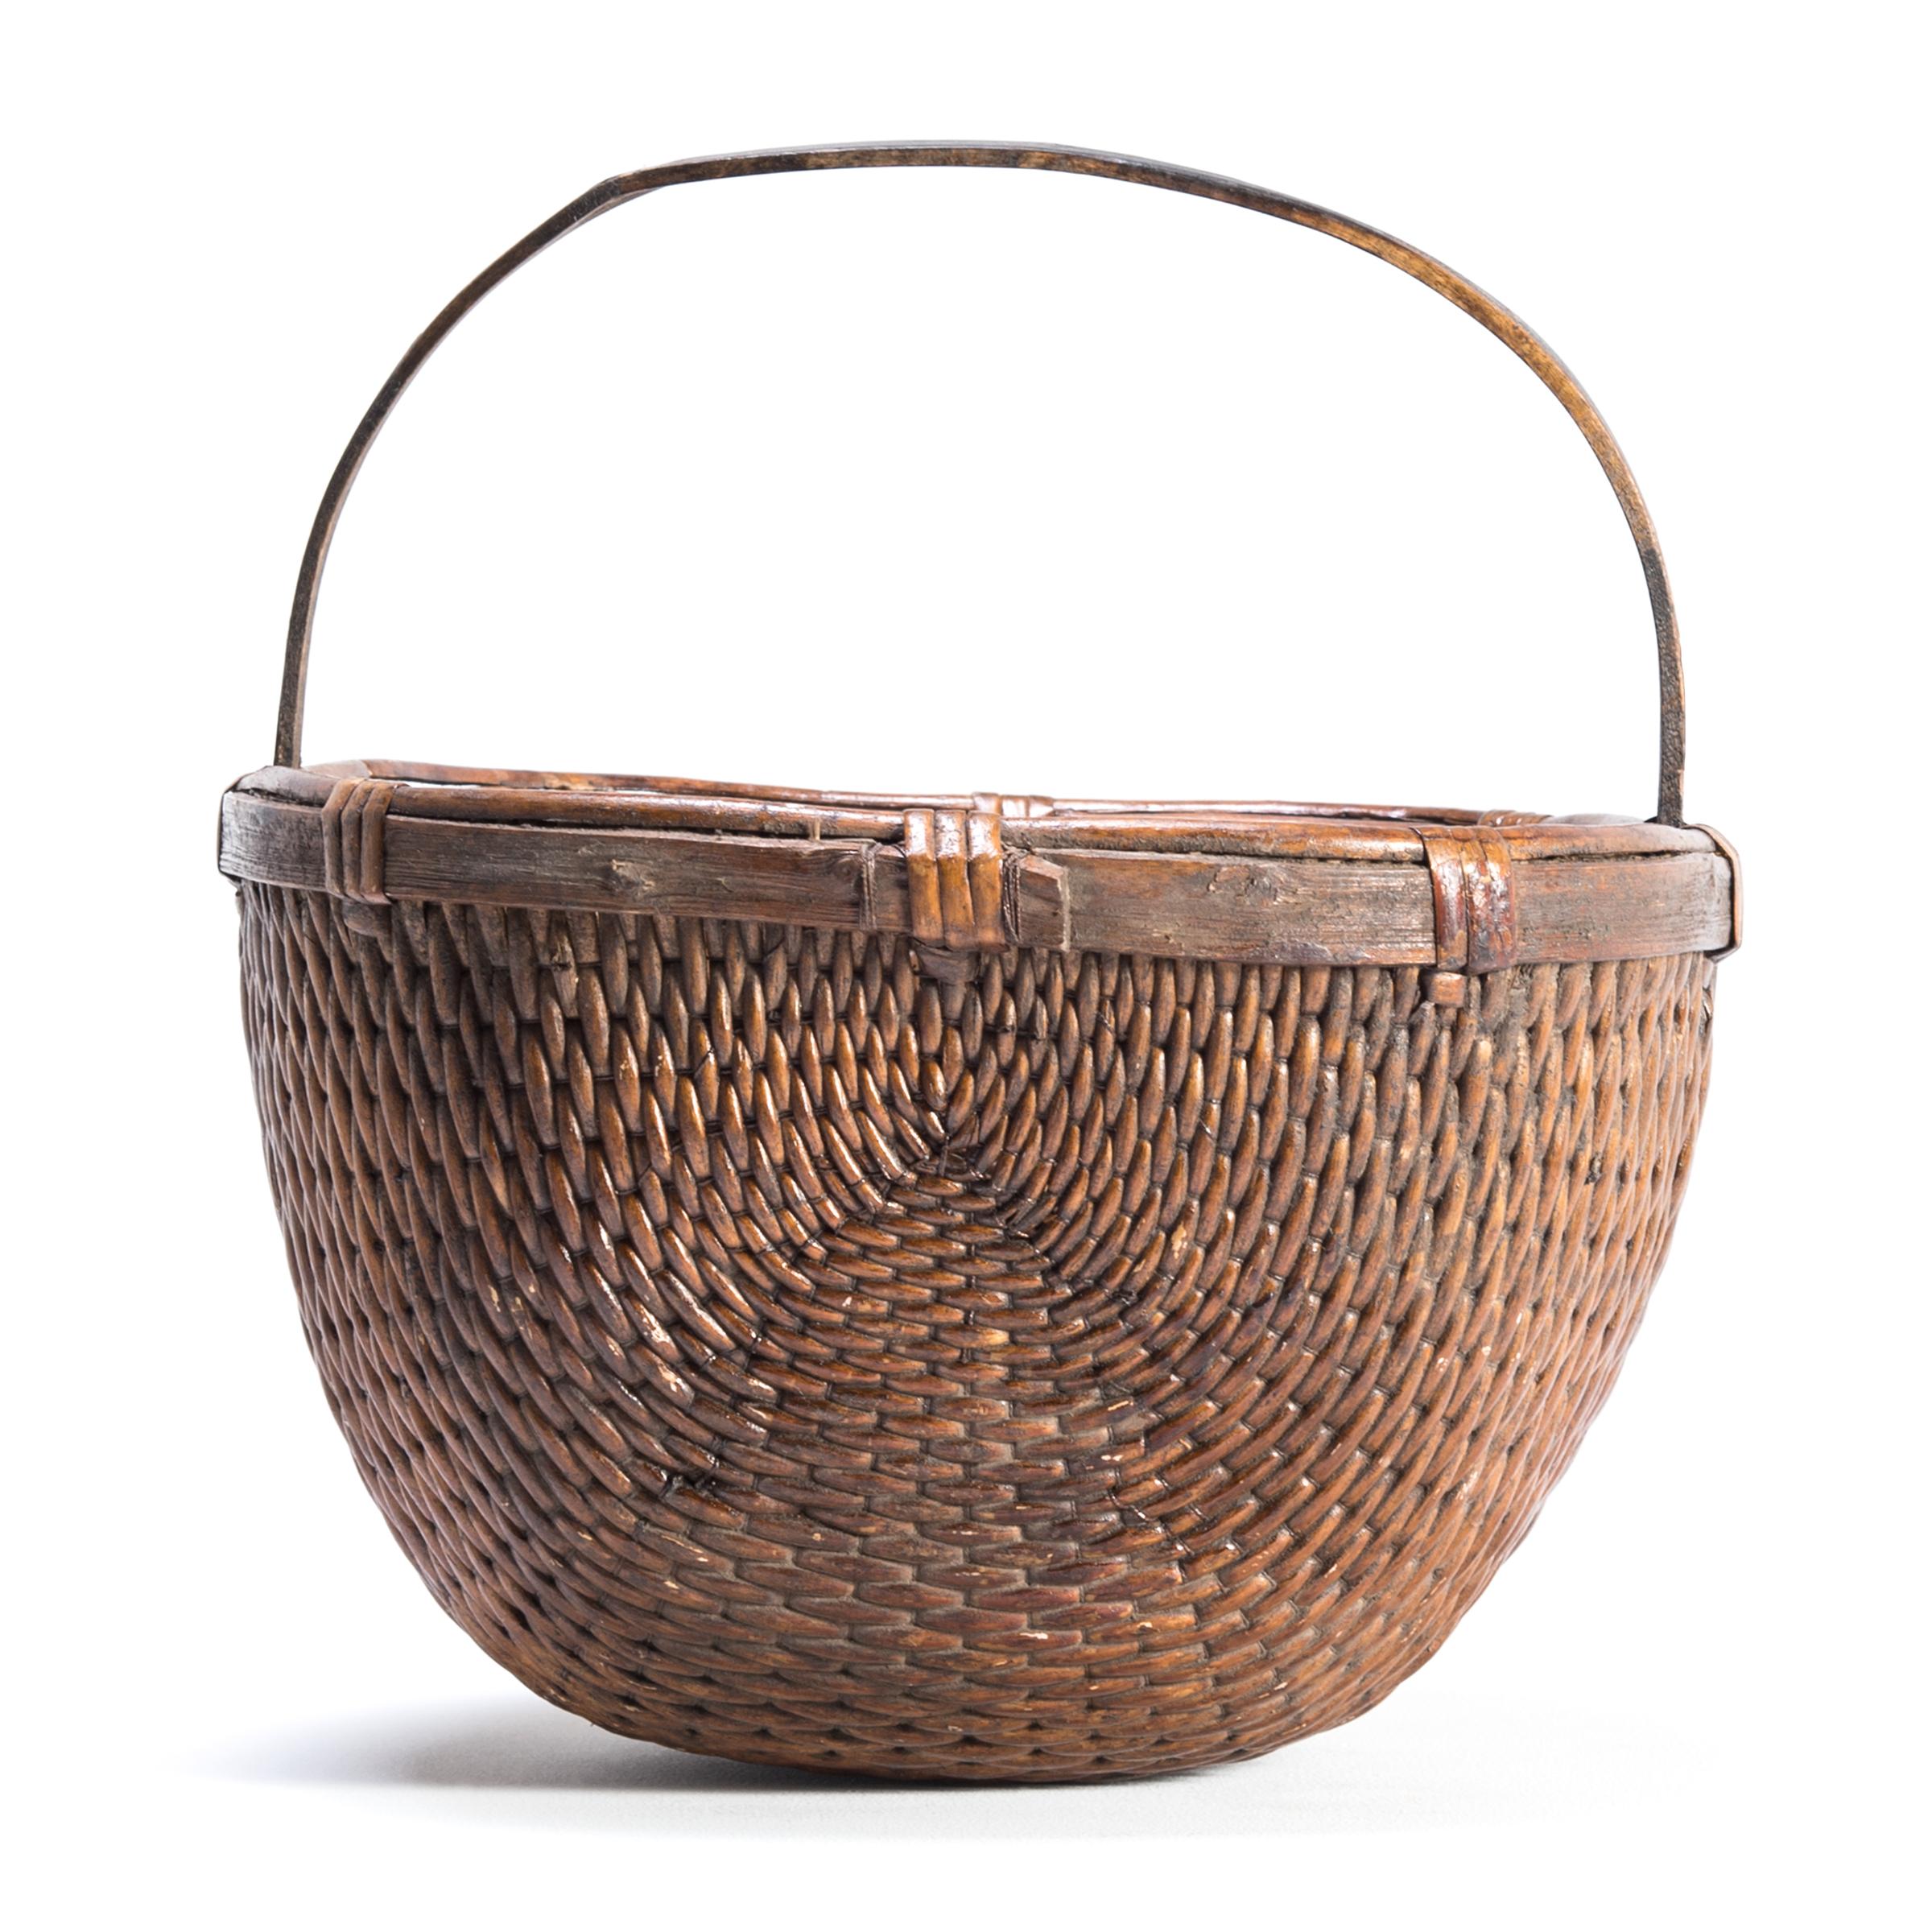 Hand-Woven Chinese Willow Market Basket, circa 1900